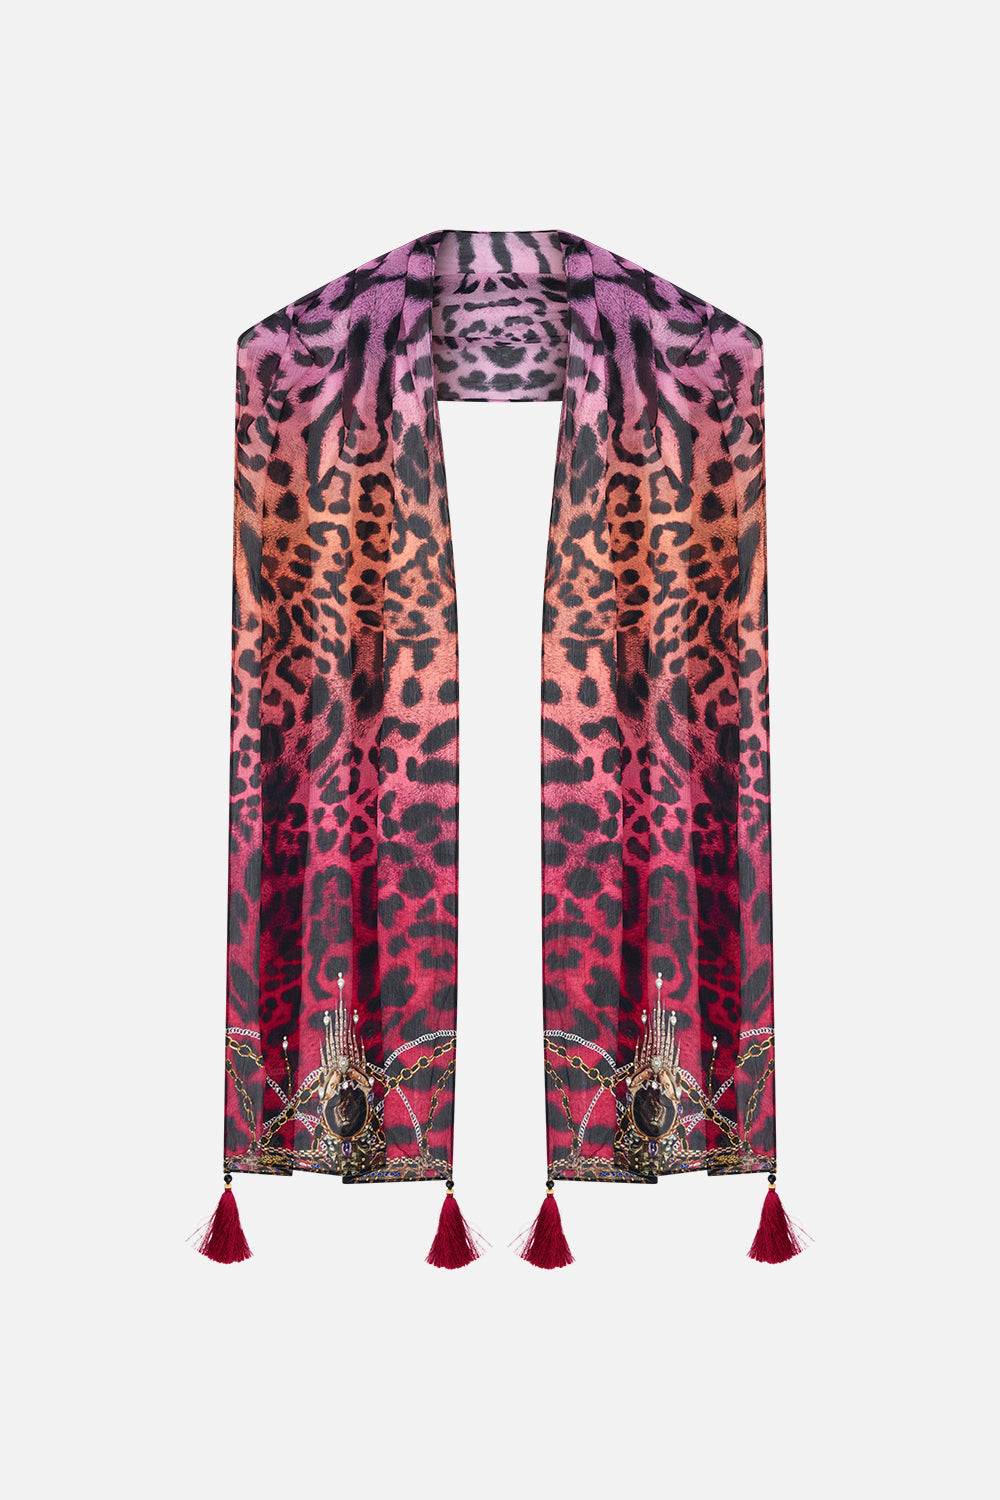 Product view of CAMILLA long silk scarf in Wild Loving print